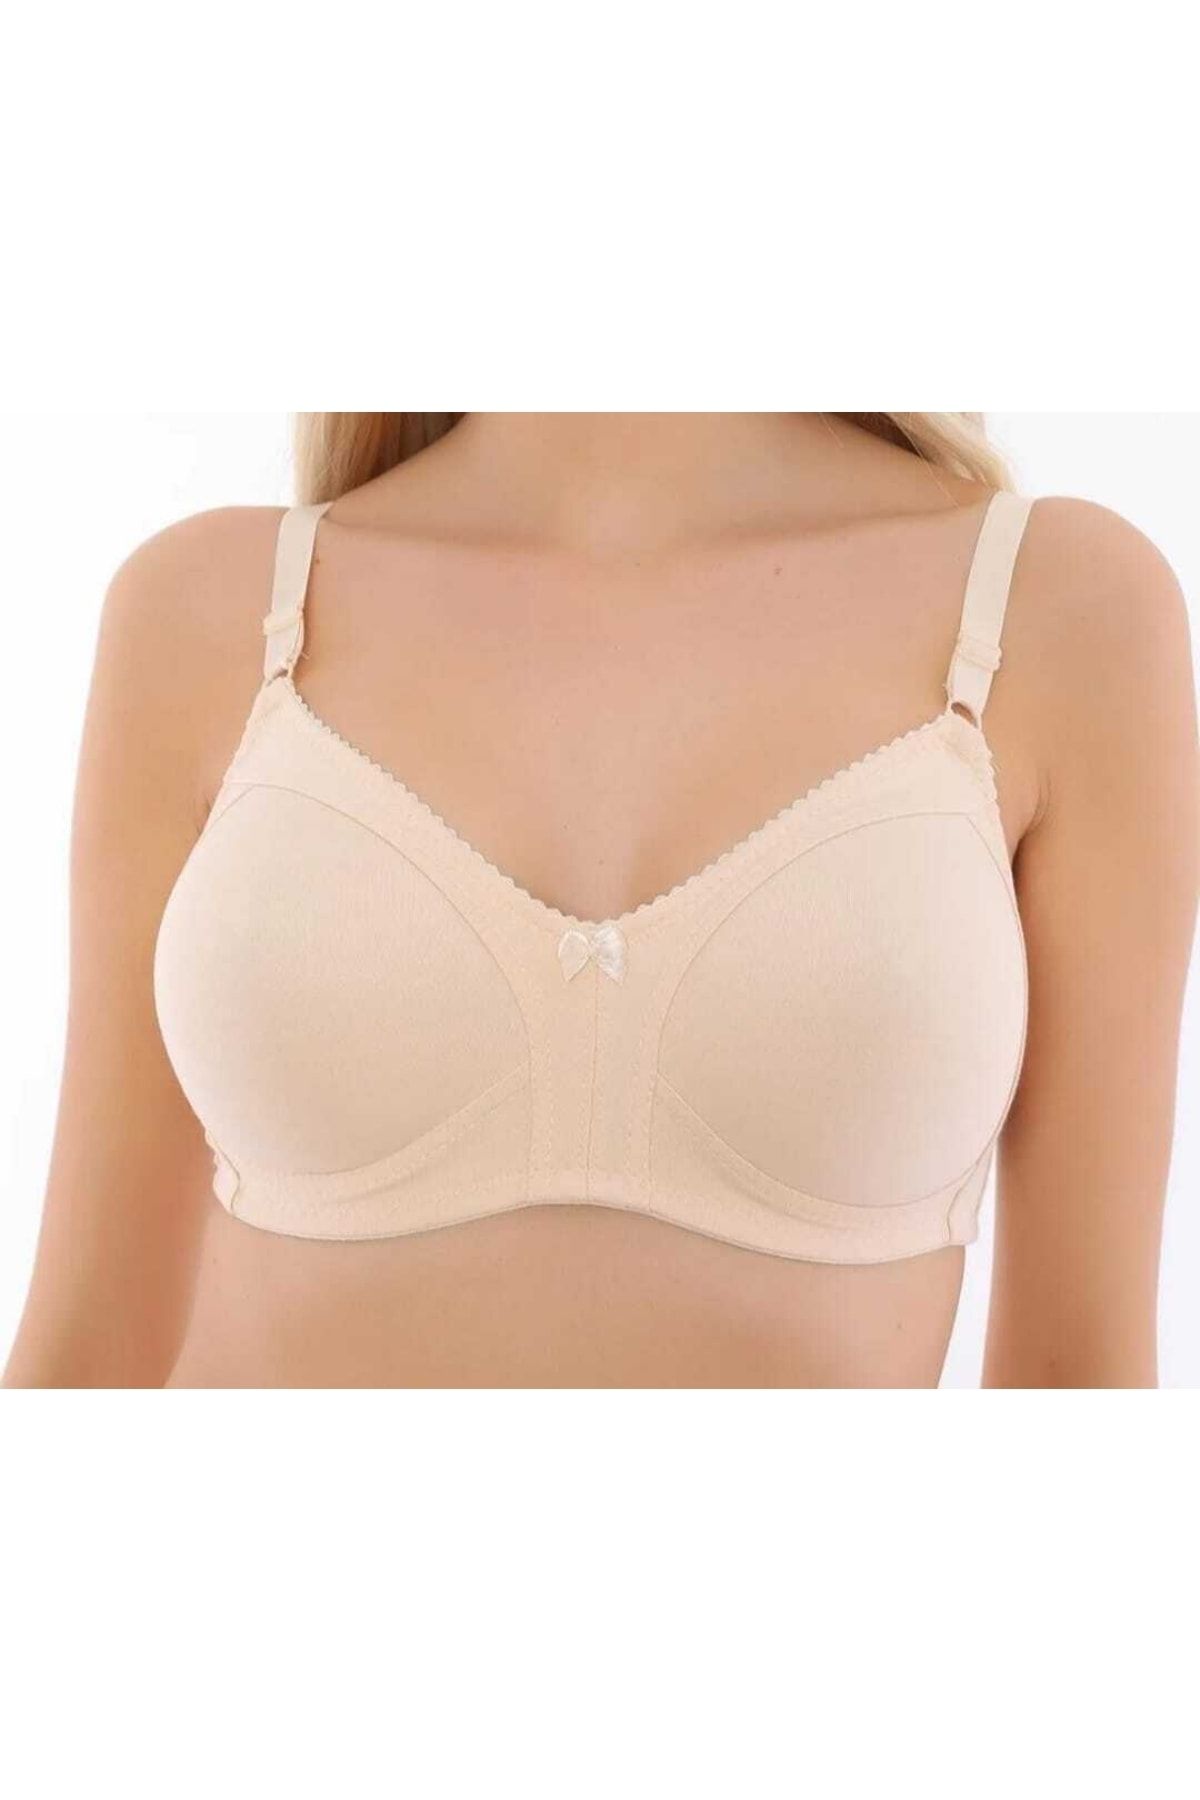 NARIYA Women's Large Size Cotton D Cup Combed Combed Cotton Bra Daily  Comfortable Underwear - Trendyol